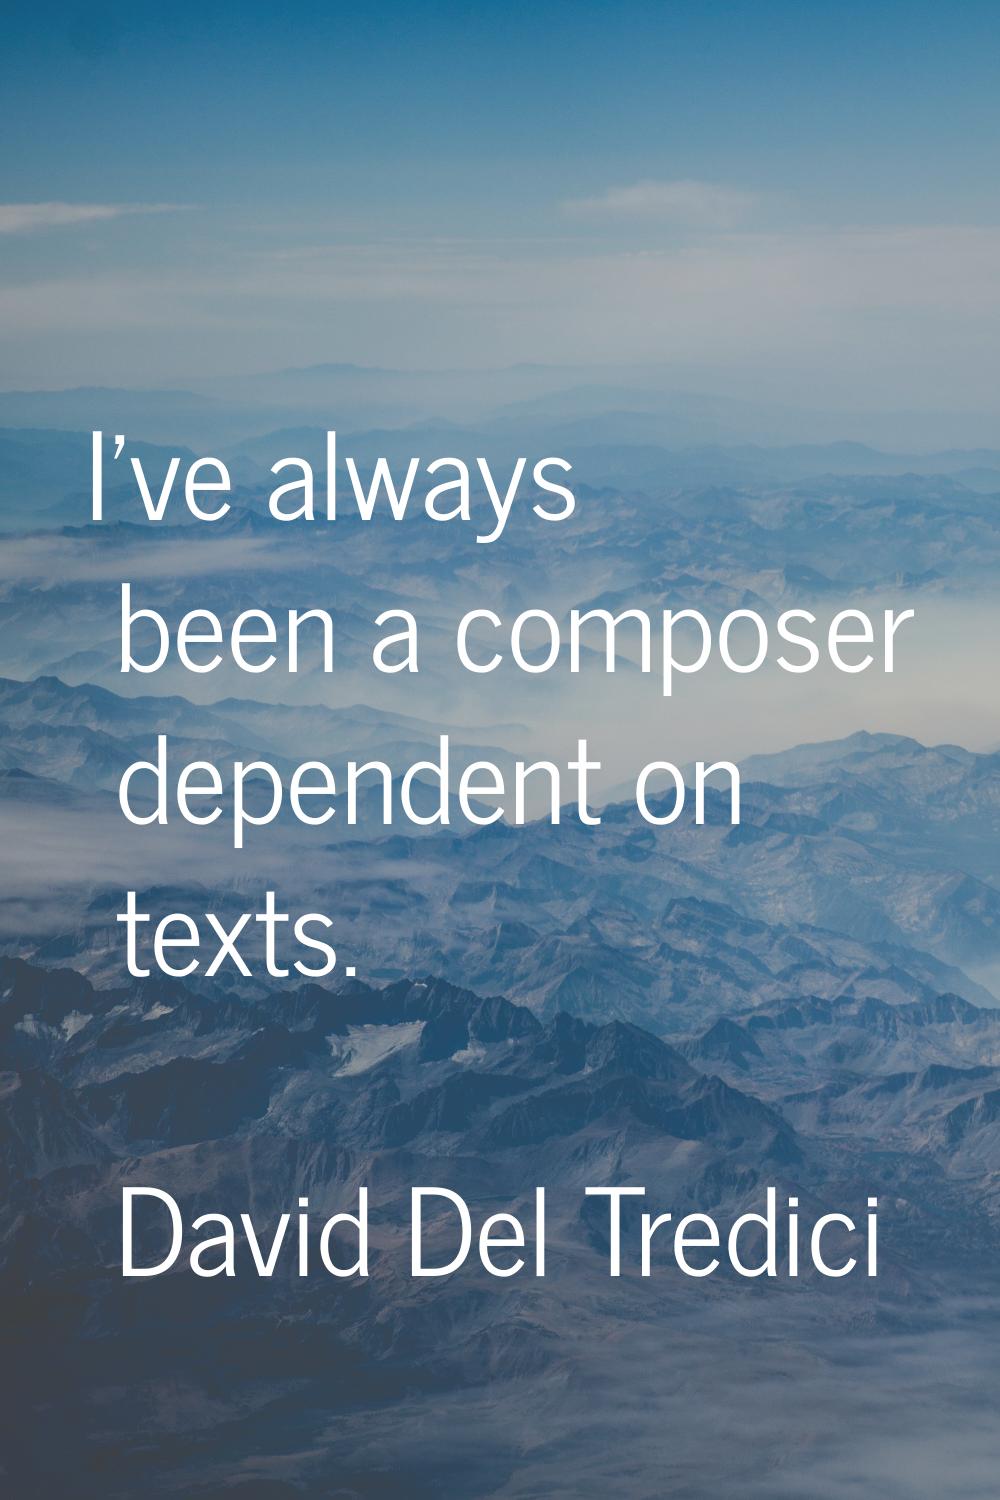 I've always been a composer dependent on texts.